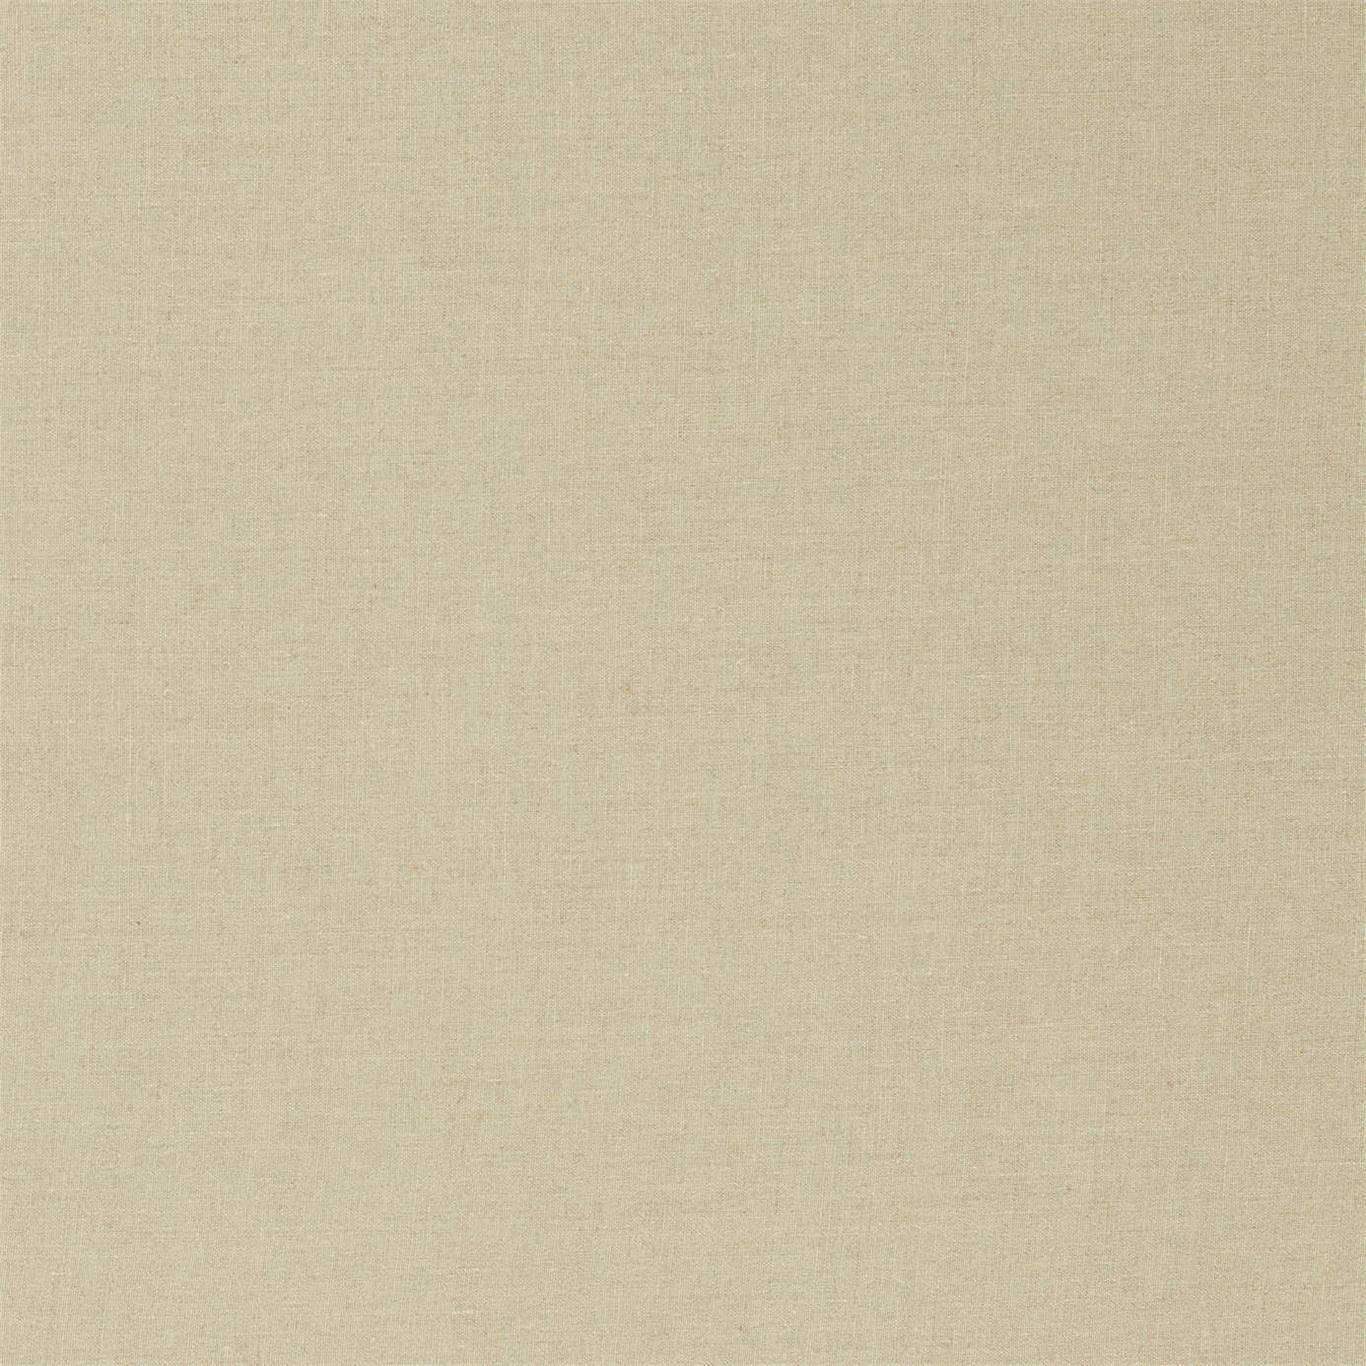 Zoffany Linens Natural Flax Fabric by ZOF